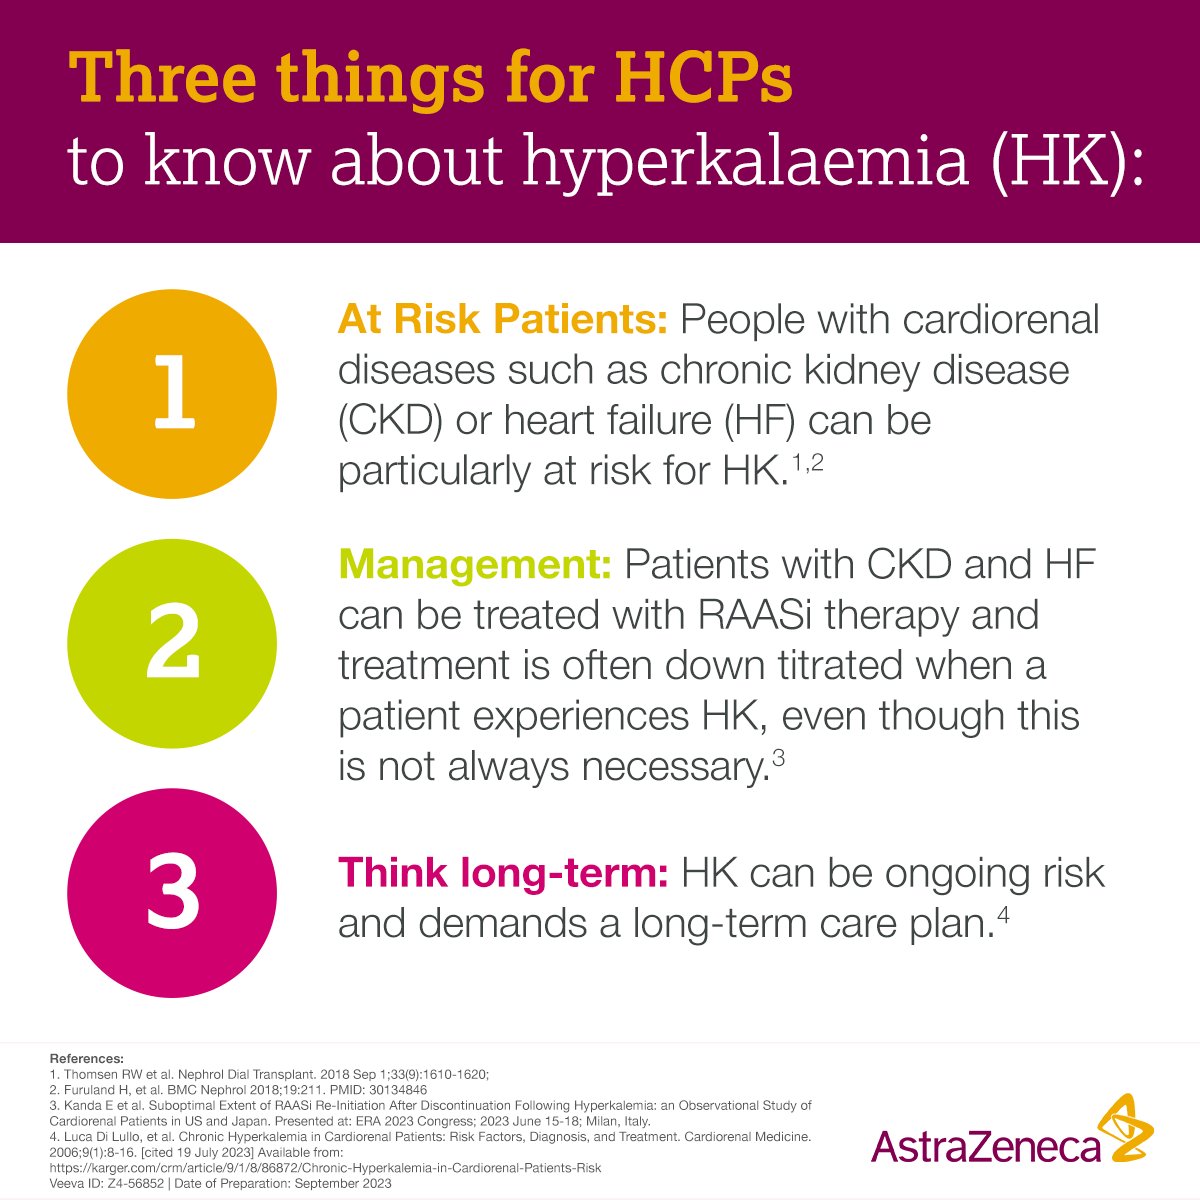 When hyperkalemia (HK) is diagnosed, lifesaving RAASi therapy is often reduced or discontinued, which can have serious consequences. Learn how we are helping to empower physicians with important insights to advance guideline-directed care: learn.az/6010ut1Qn